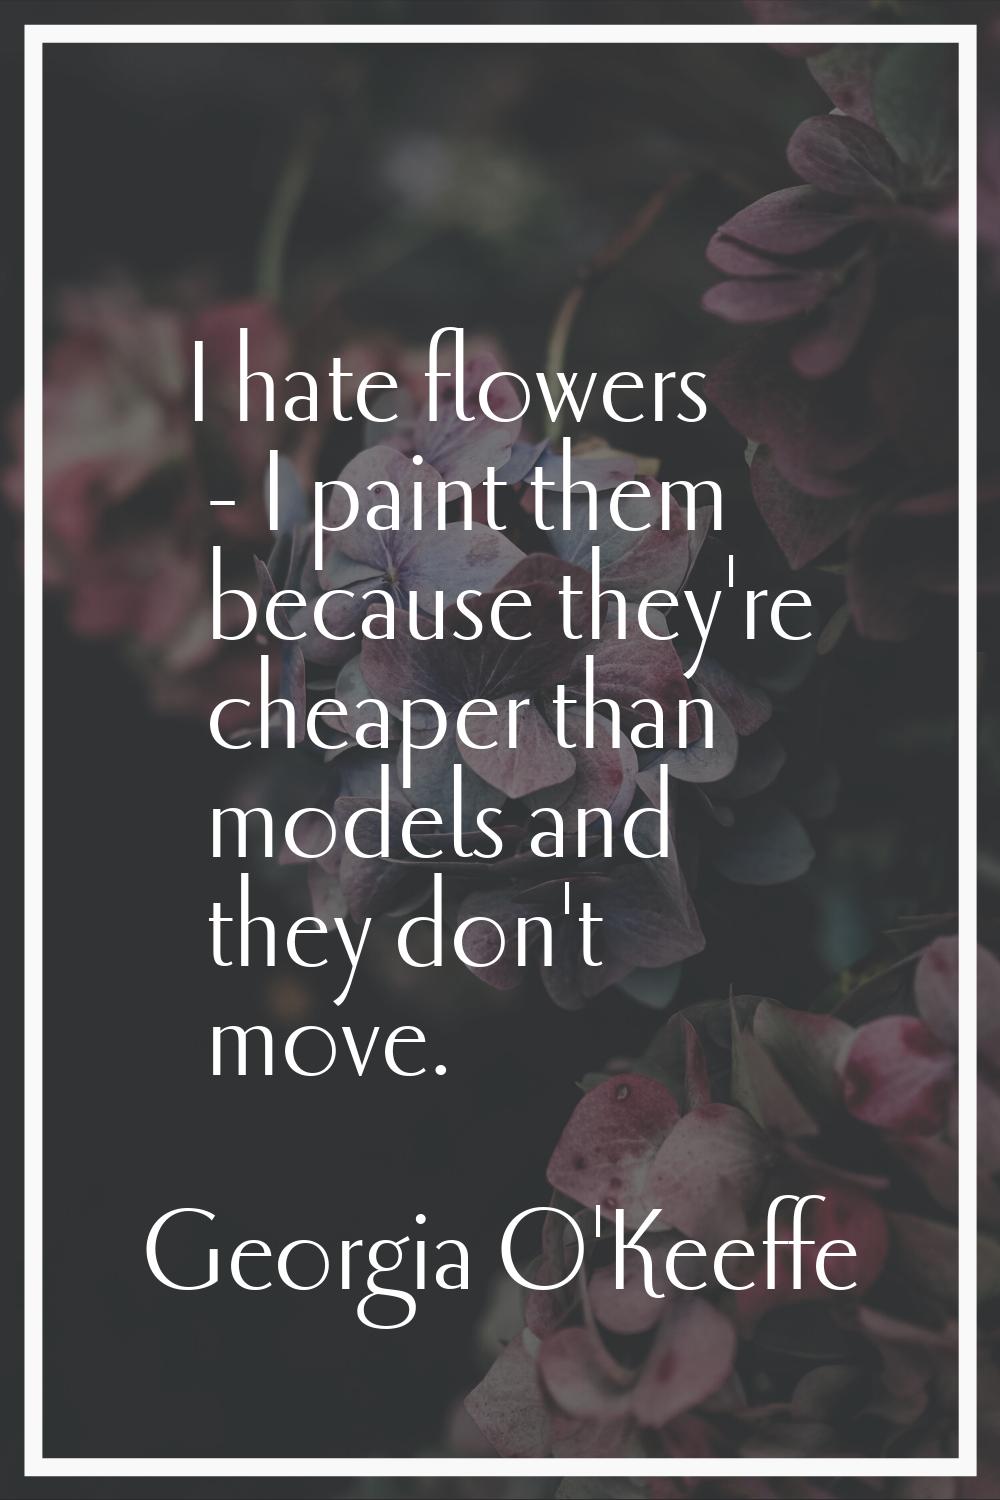 I hate flowers - I paint them because they're cheaper than models and they don't move.